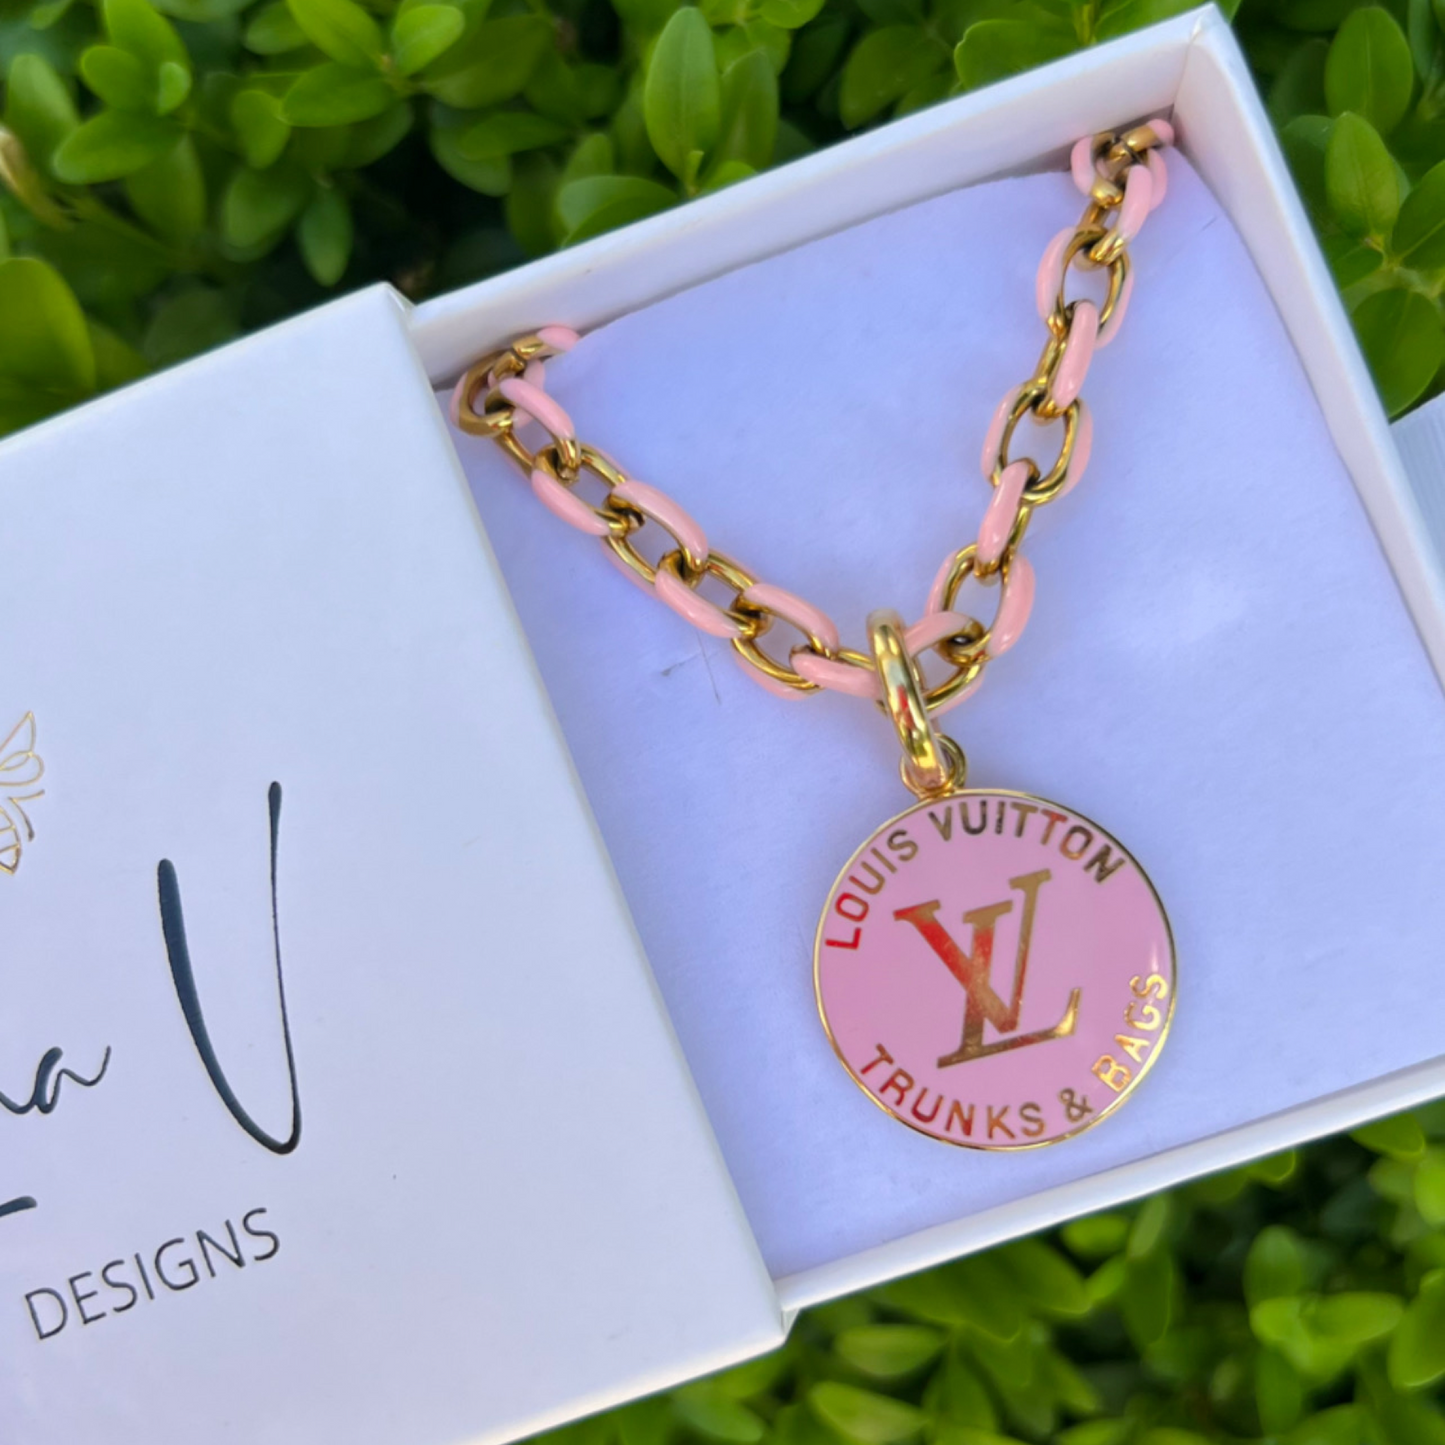 Repurposed Large Double Sided LV Pink Flower Charm Necklace – LINA V DESIGNS